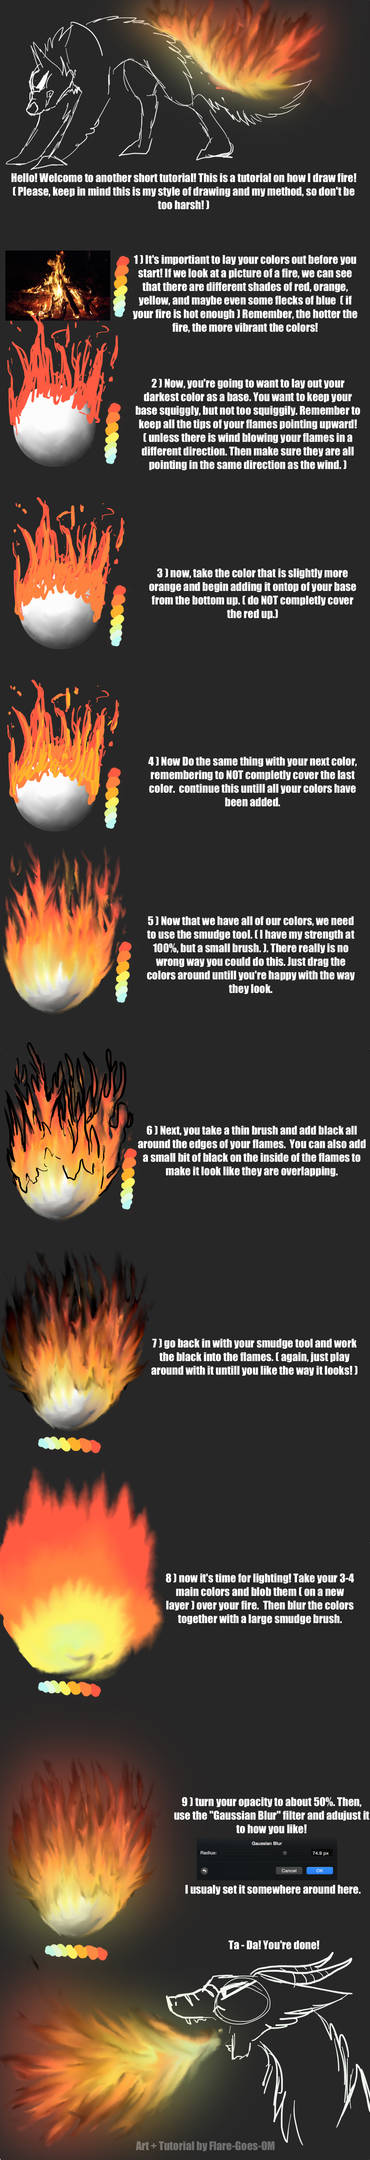 3 WAYS TO DRAW AND PAINT FIRE! 